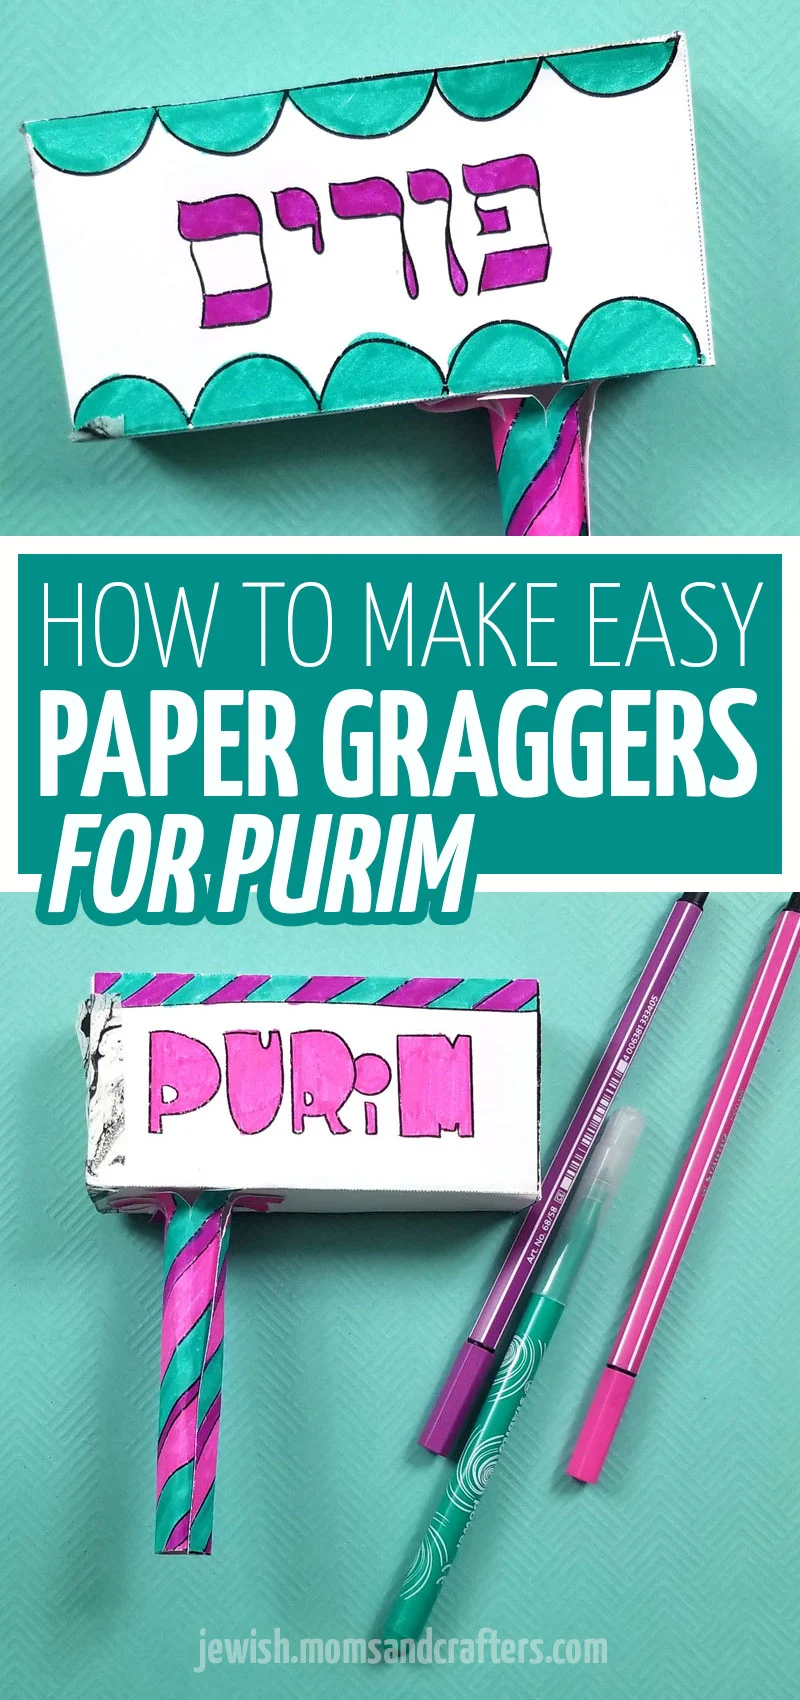 Make these easy paper purim grogger crafts for kids or adults - even toddlers and preschoolers can color and craft this fun purim project!